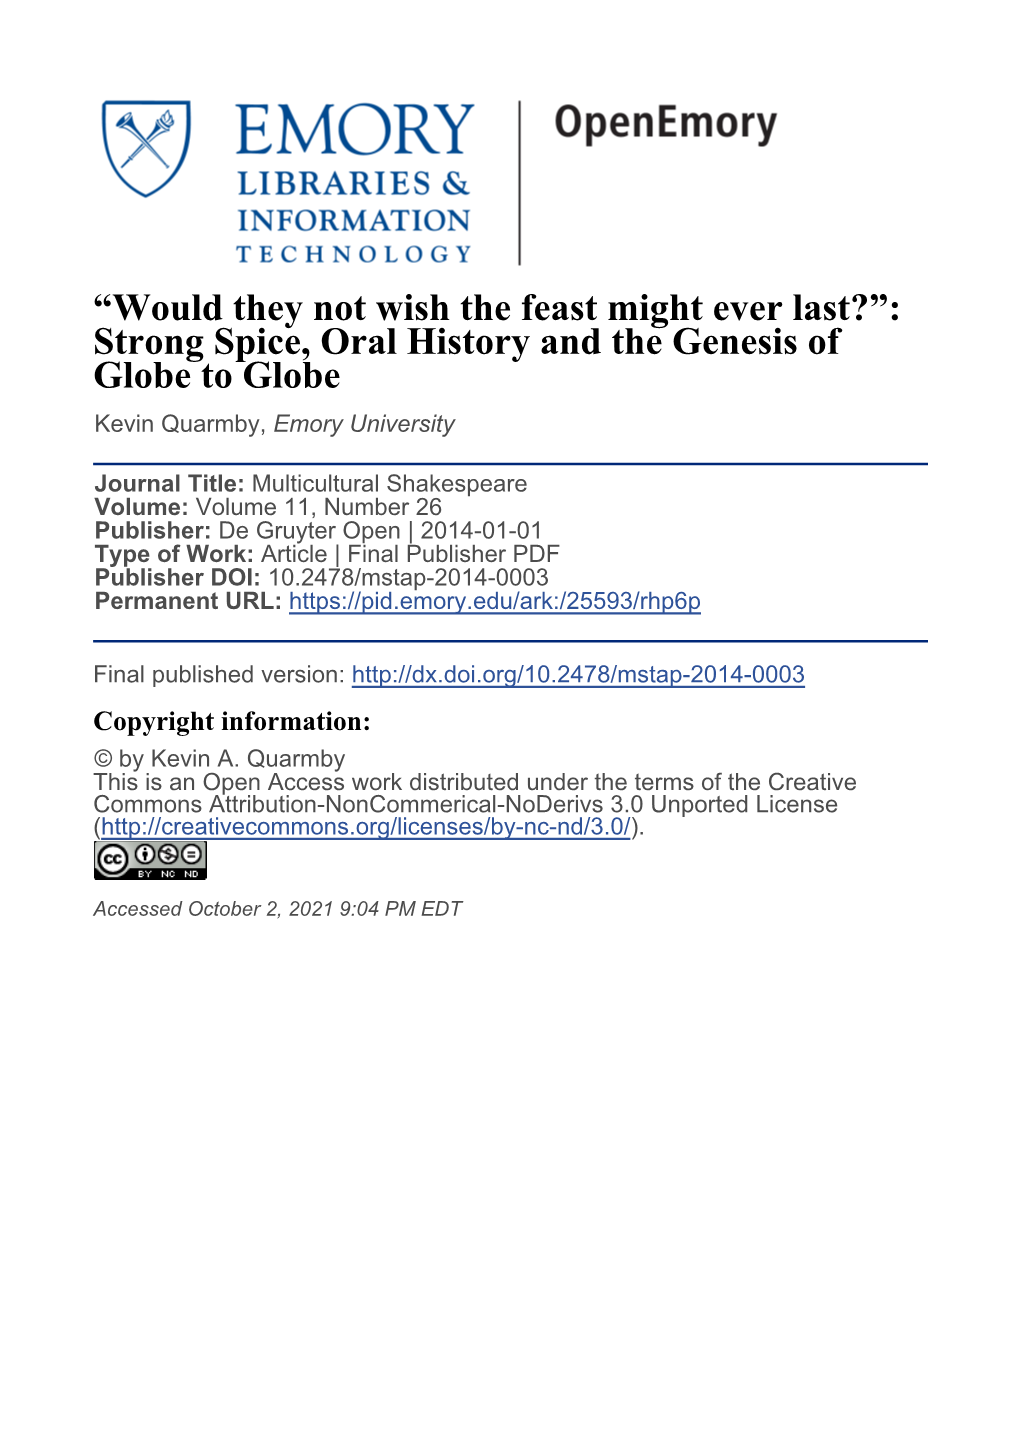 Would They Not Wish the Feast Might Ever Last?”: Strong Spice, Oral History and the Genesis of Globe to Globe Kevin Quarmby, Emory University